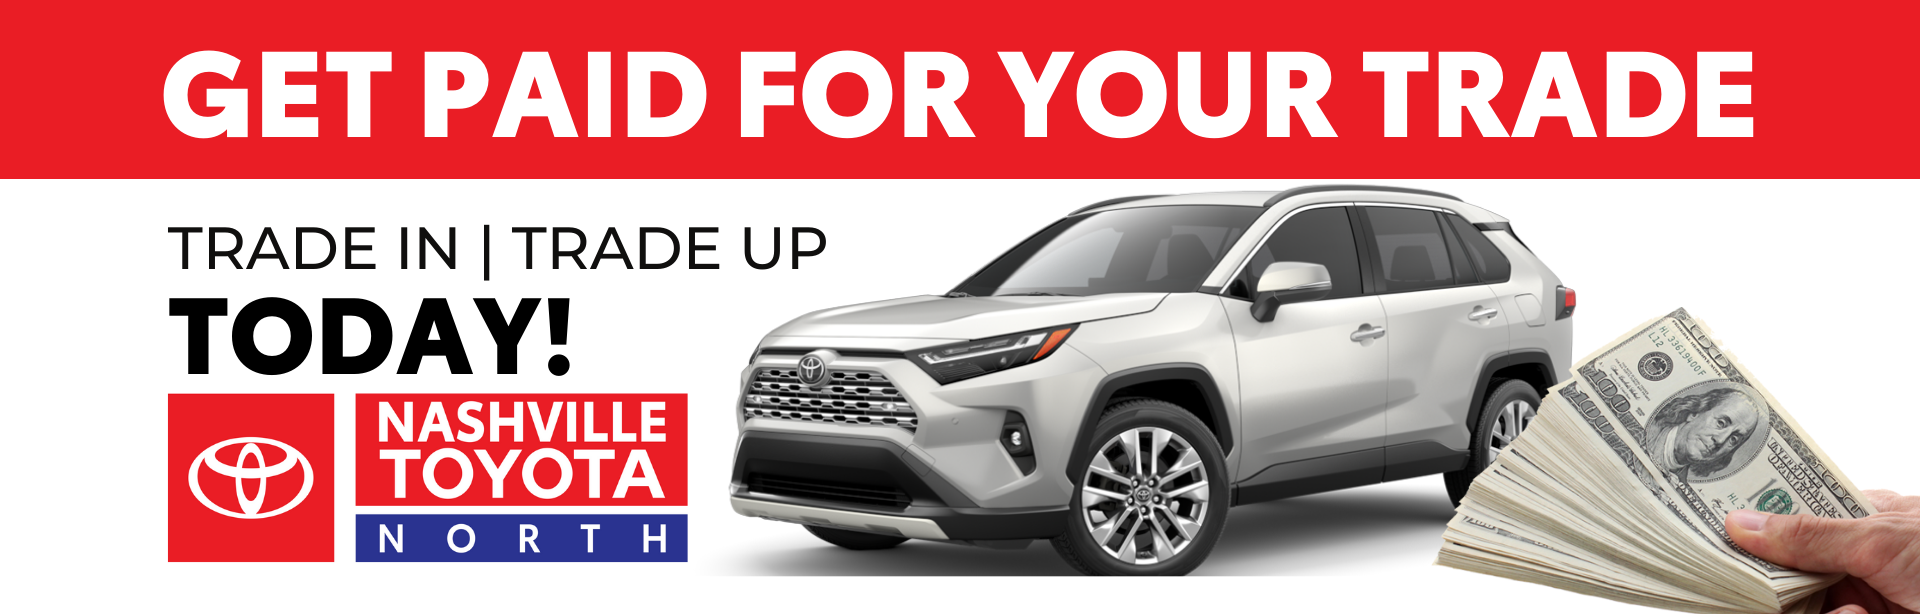 Nashville Toyota North Get Paid For Your Trade